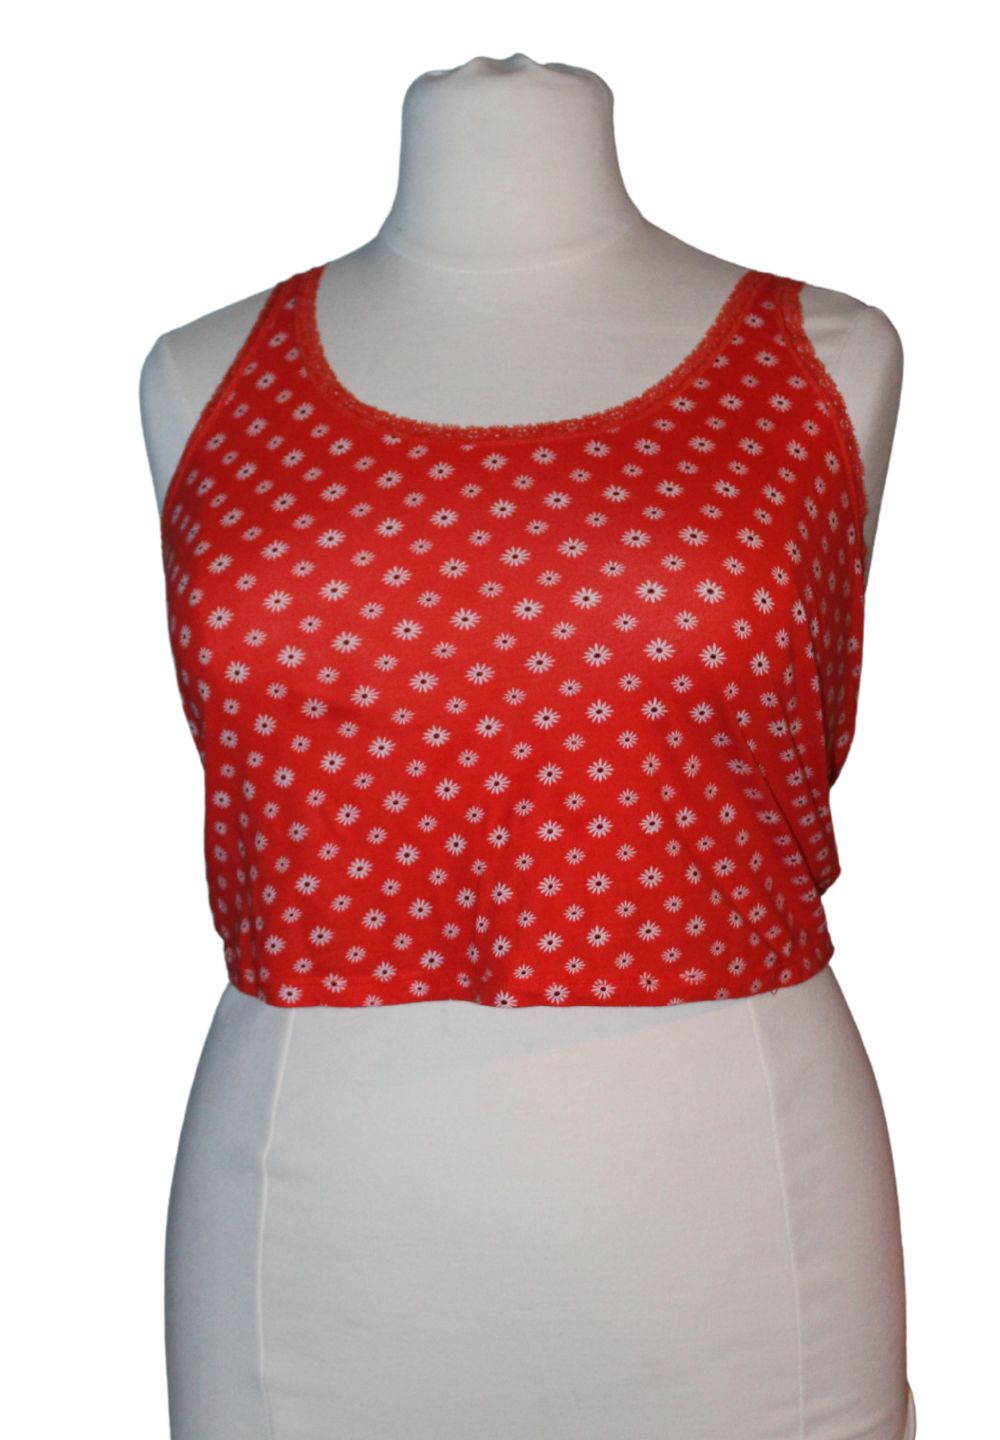 BP Orange and Red Daisy Top, Size XL